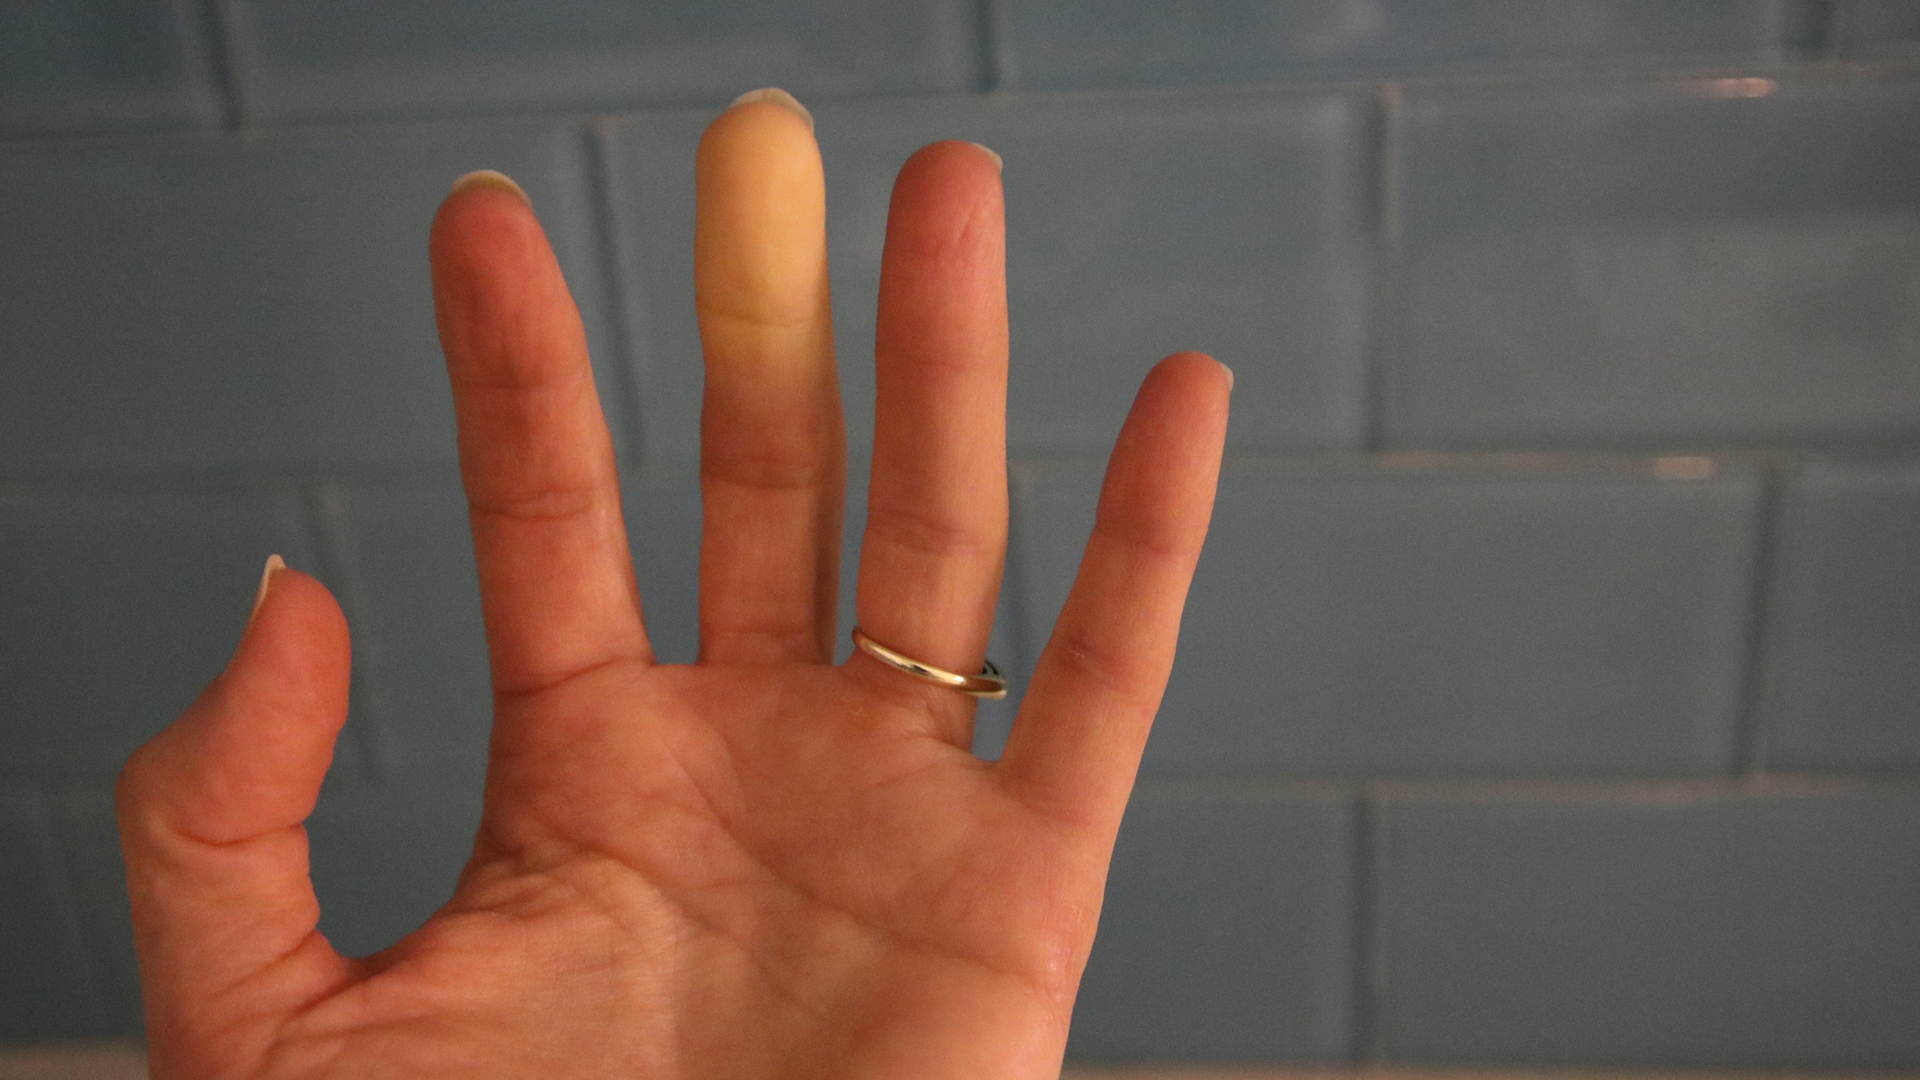 Women with Raynaud's disease who show poor circulation